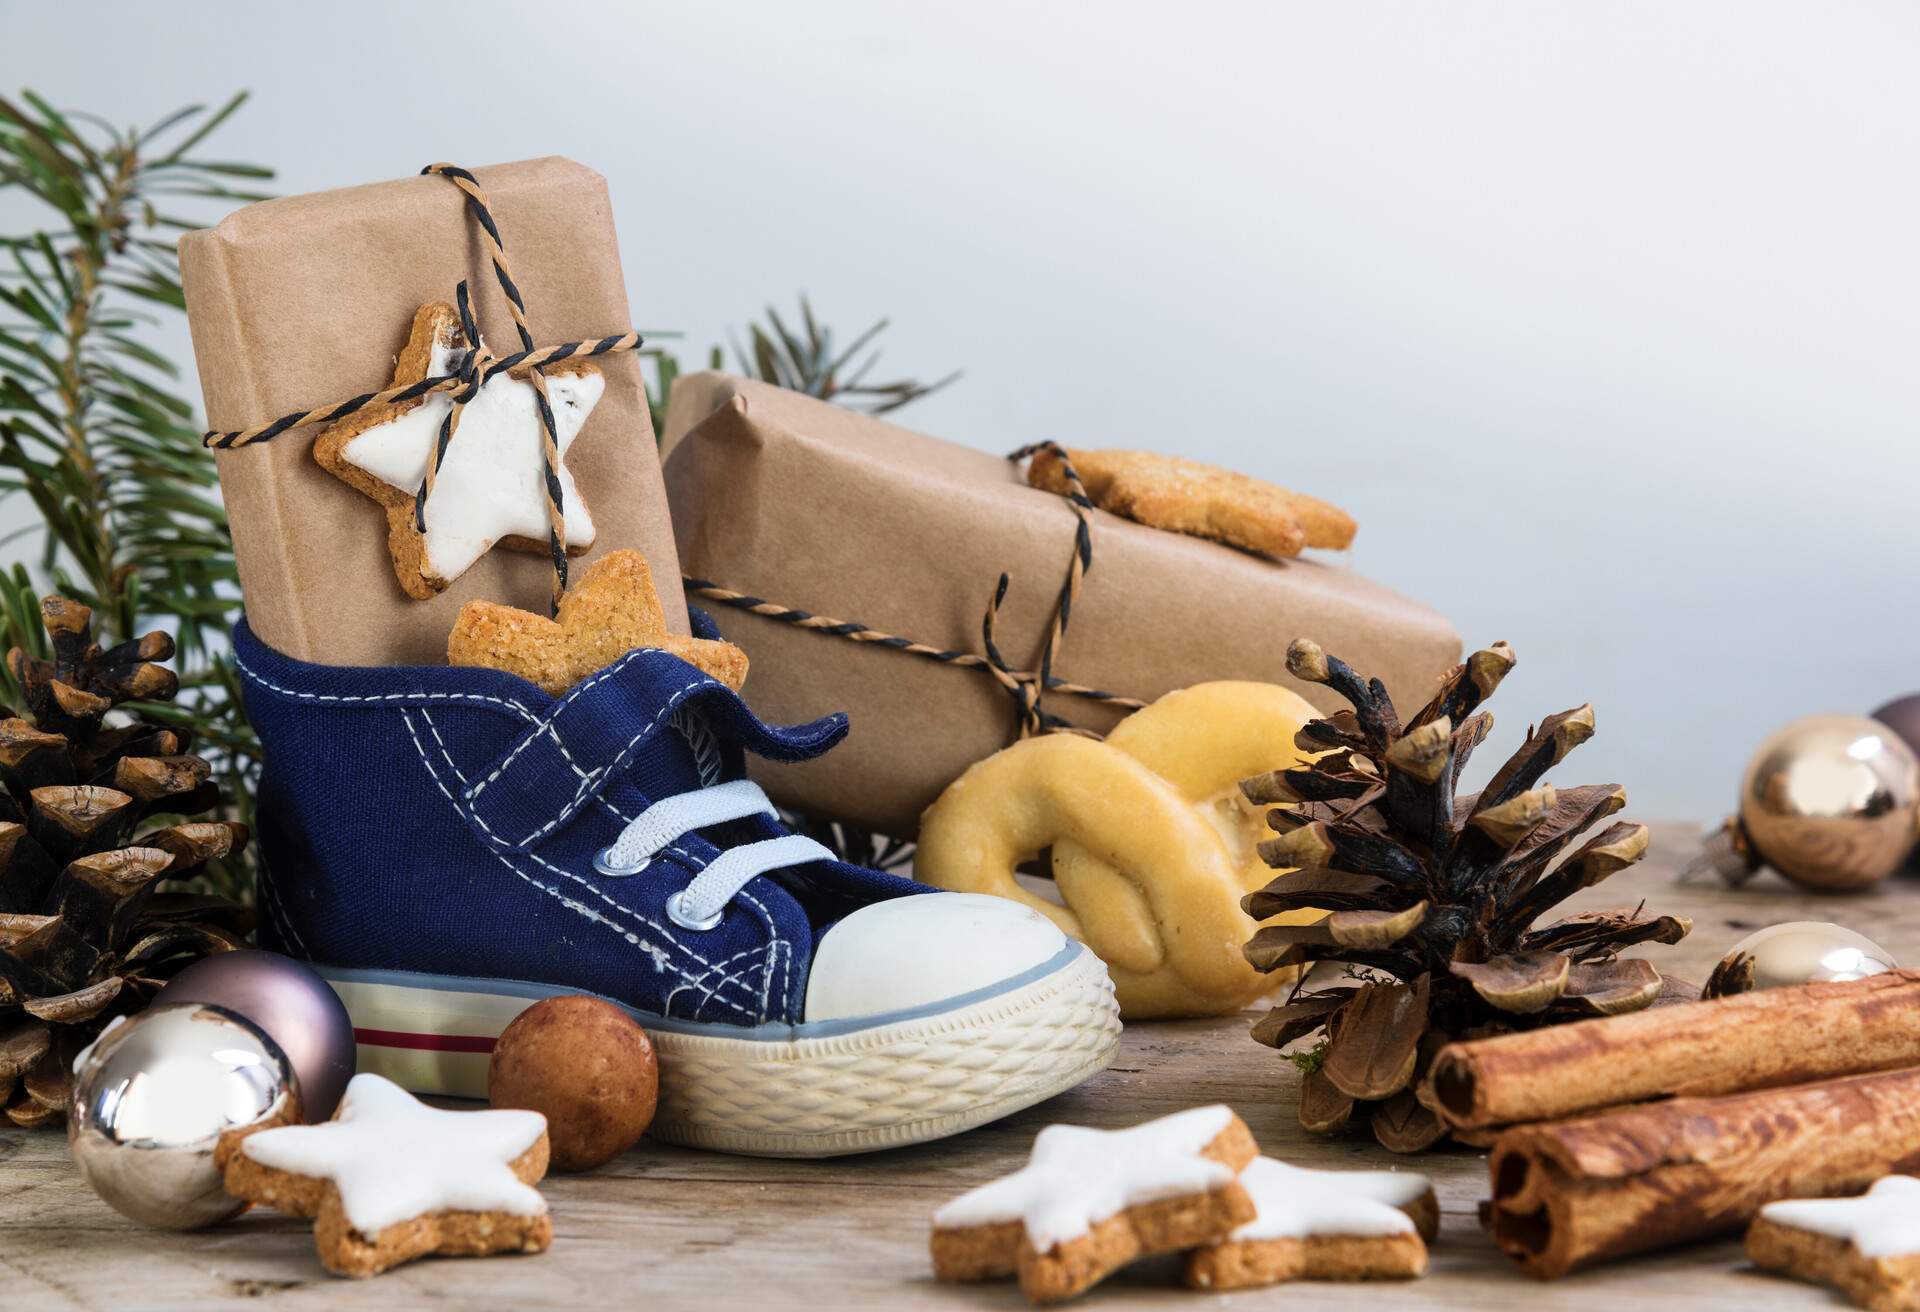 Children's shoe with sweets, gifts and christmas ornaments on rustic wood, german text Am 6. Dezember ist Nikolaustag, meaning  St. Nicholas Day December 6th, selected focus, narrow depth of field